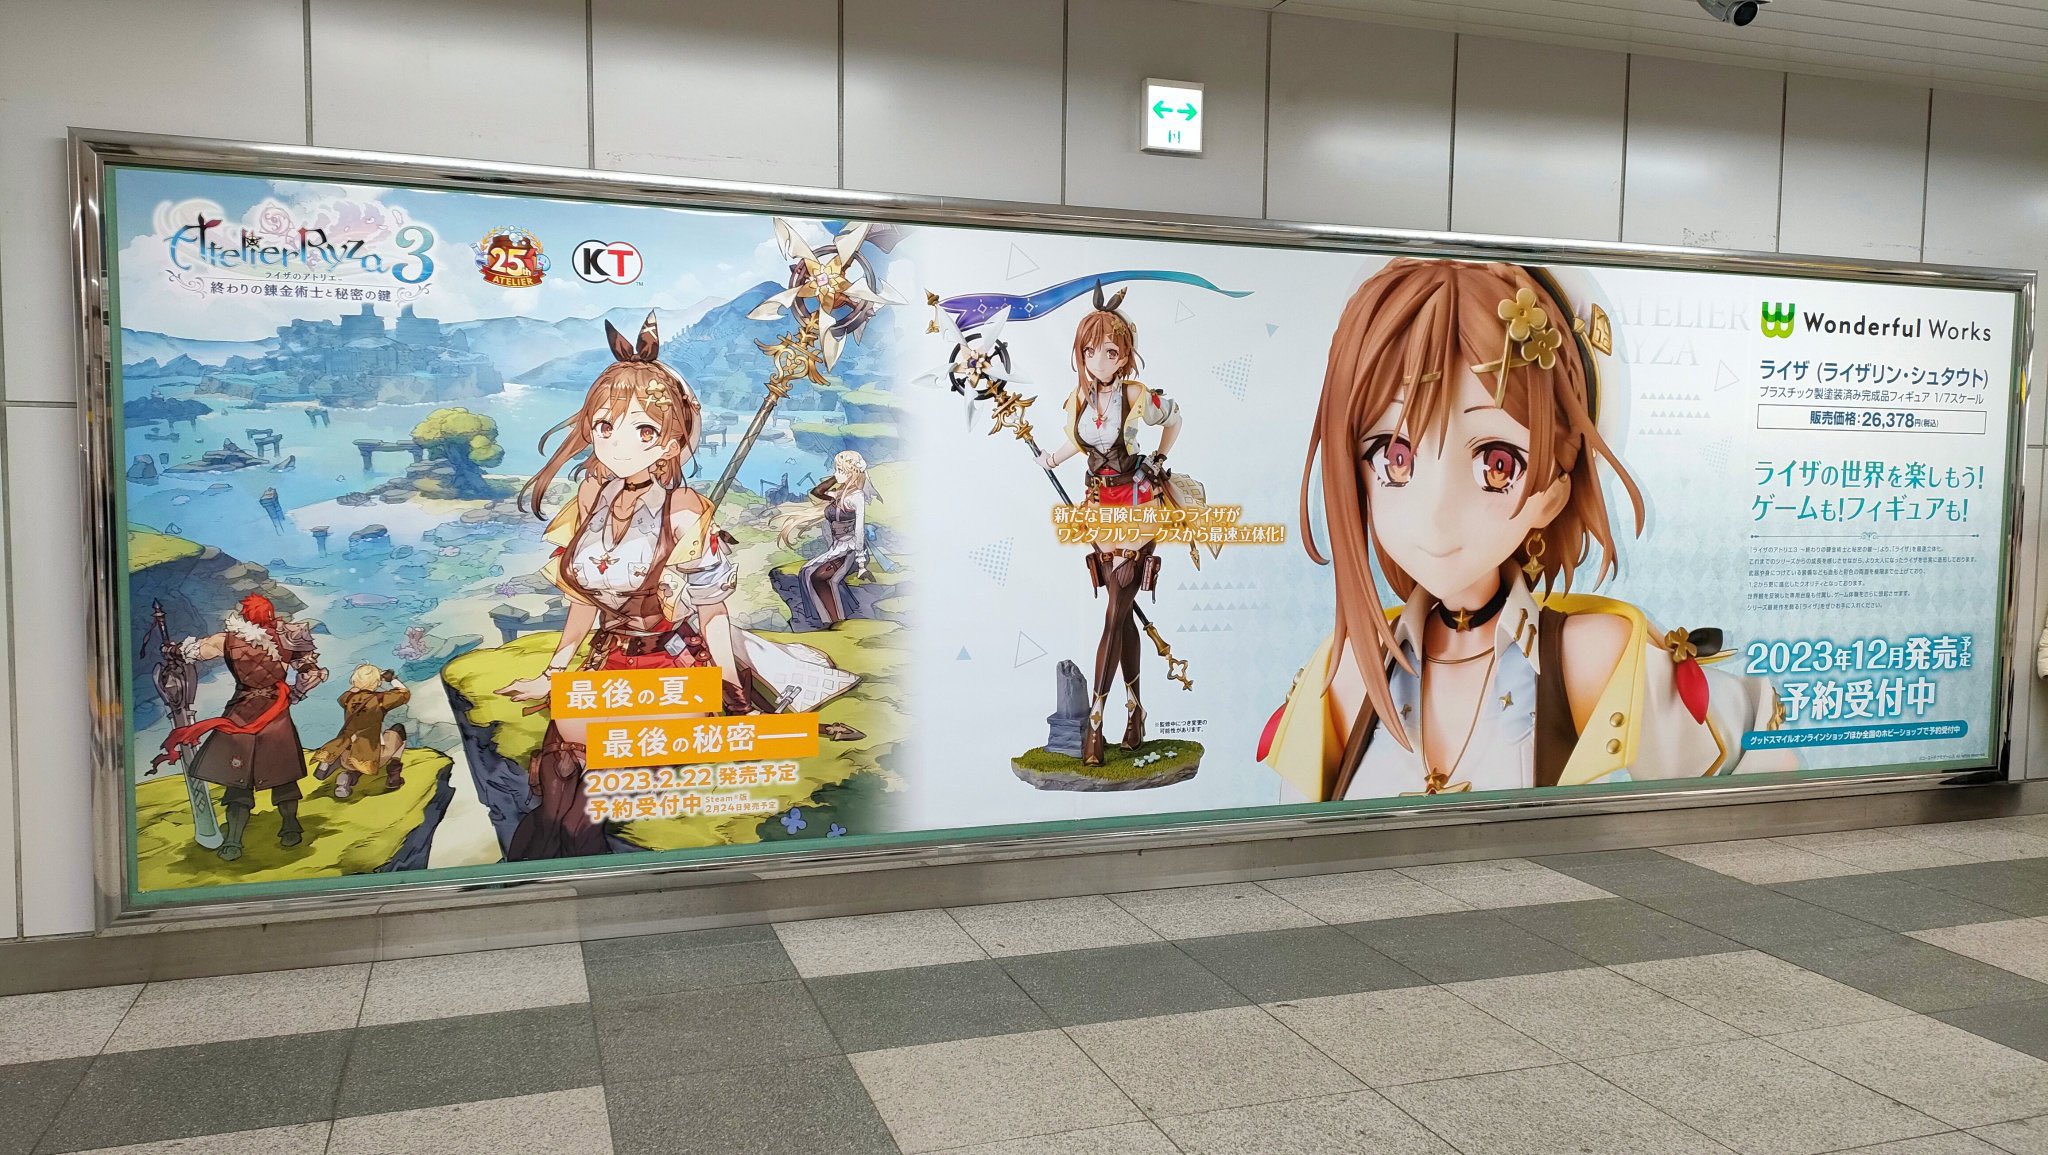 Atelier Ryza 3 Figure Ad in Japan Not-so-Subtly Blocks Her “Assets”